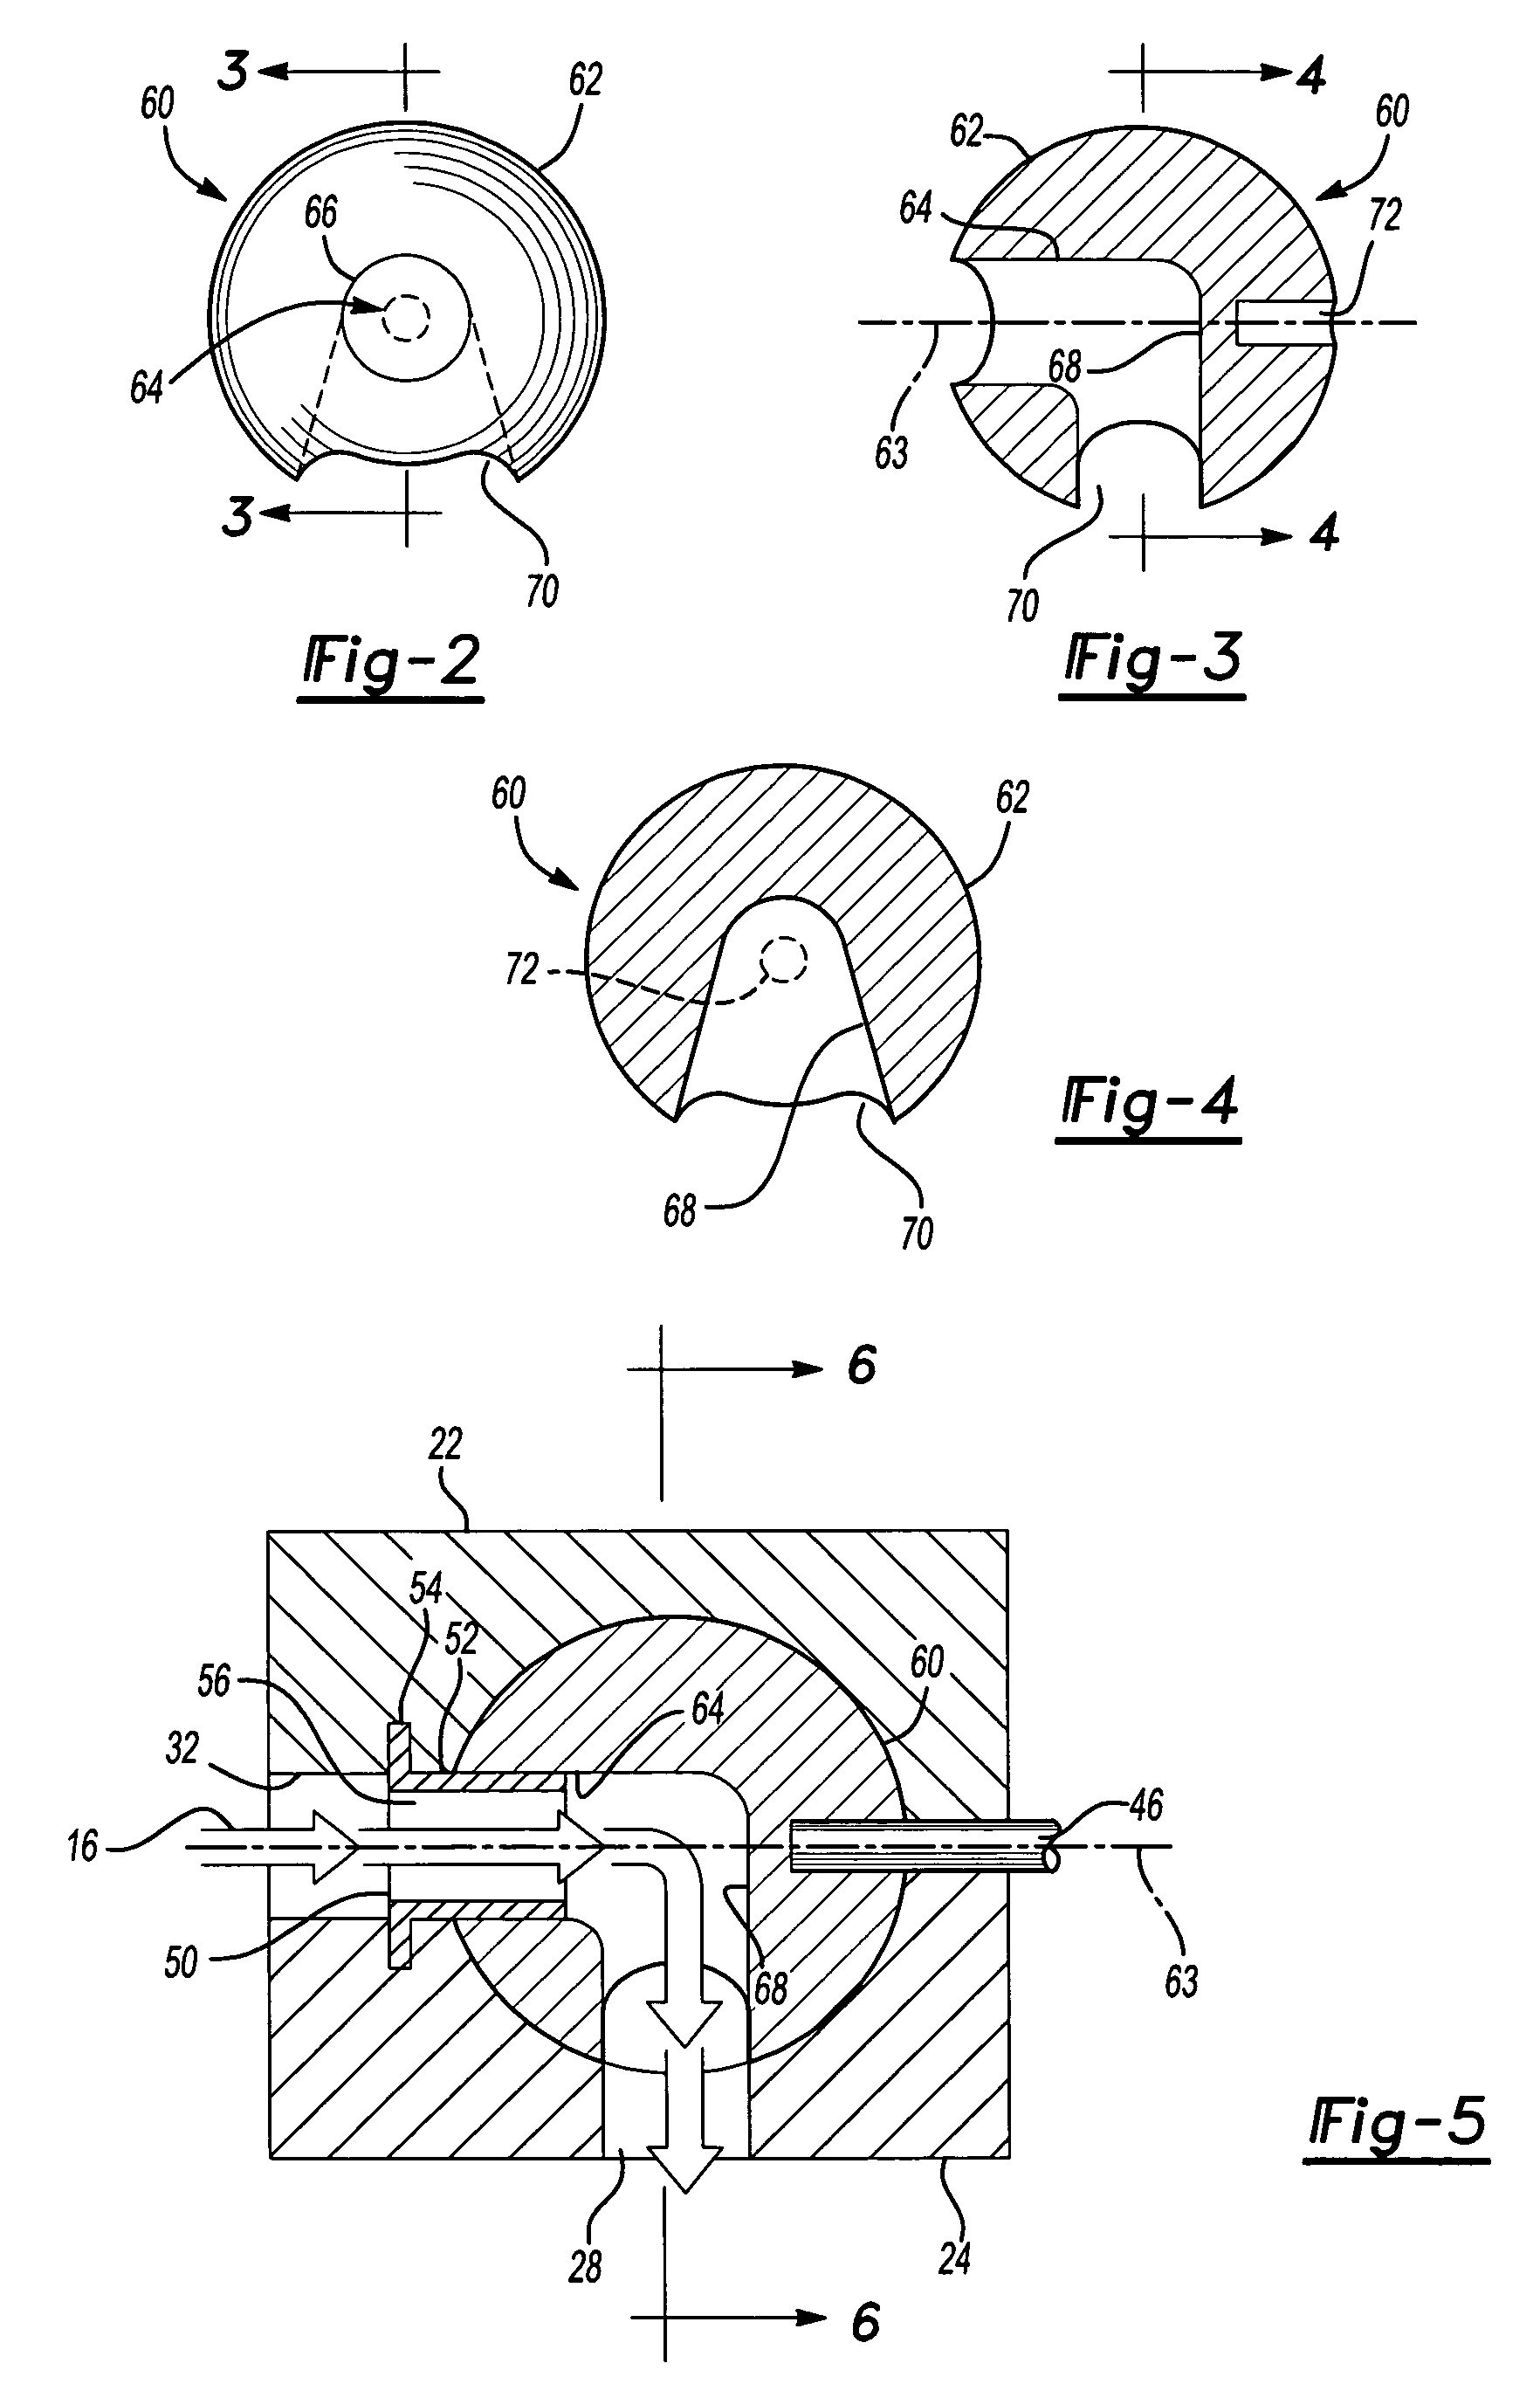 Cylinder head assembly and spherical valve for internal combustion engines